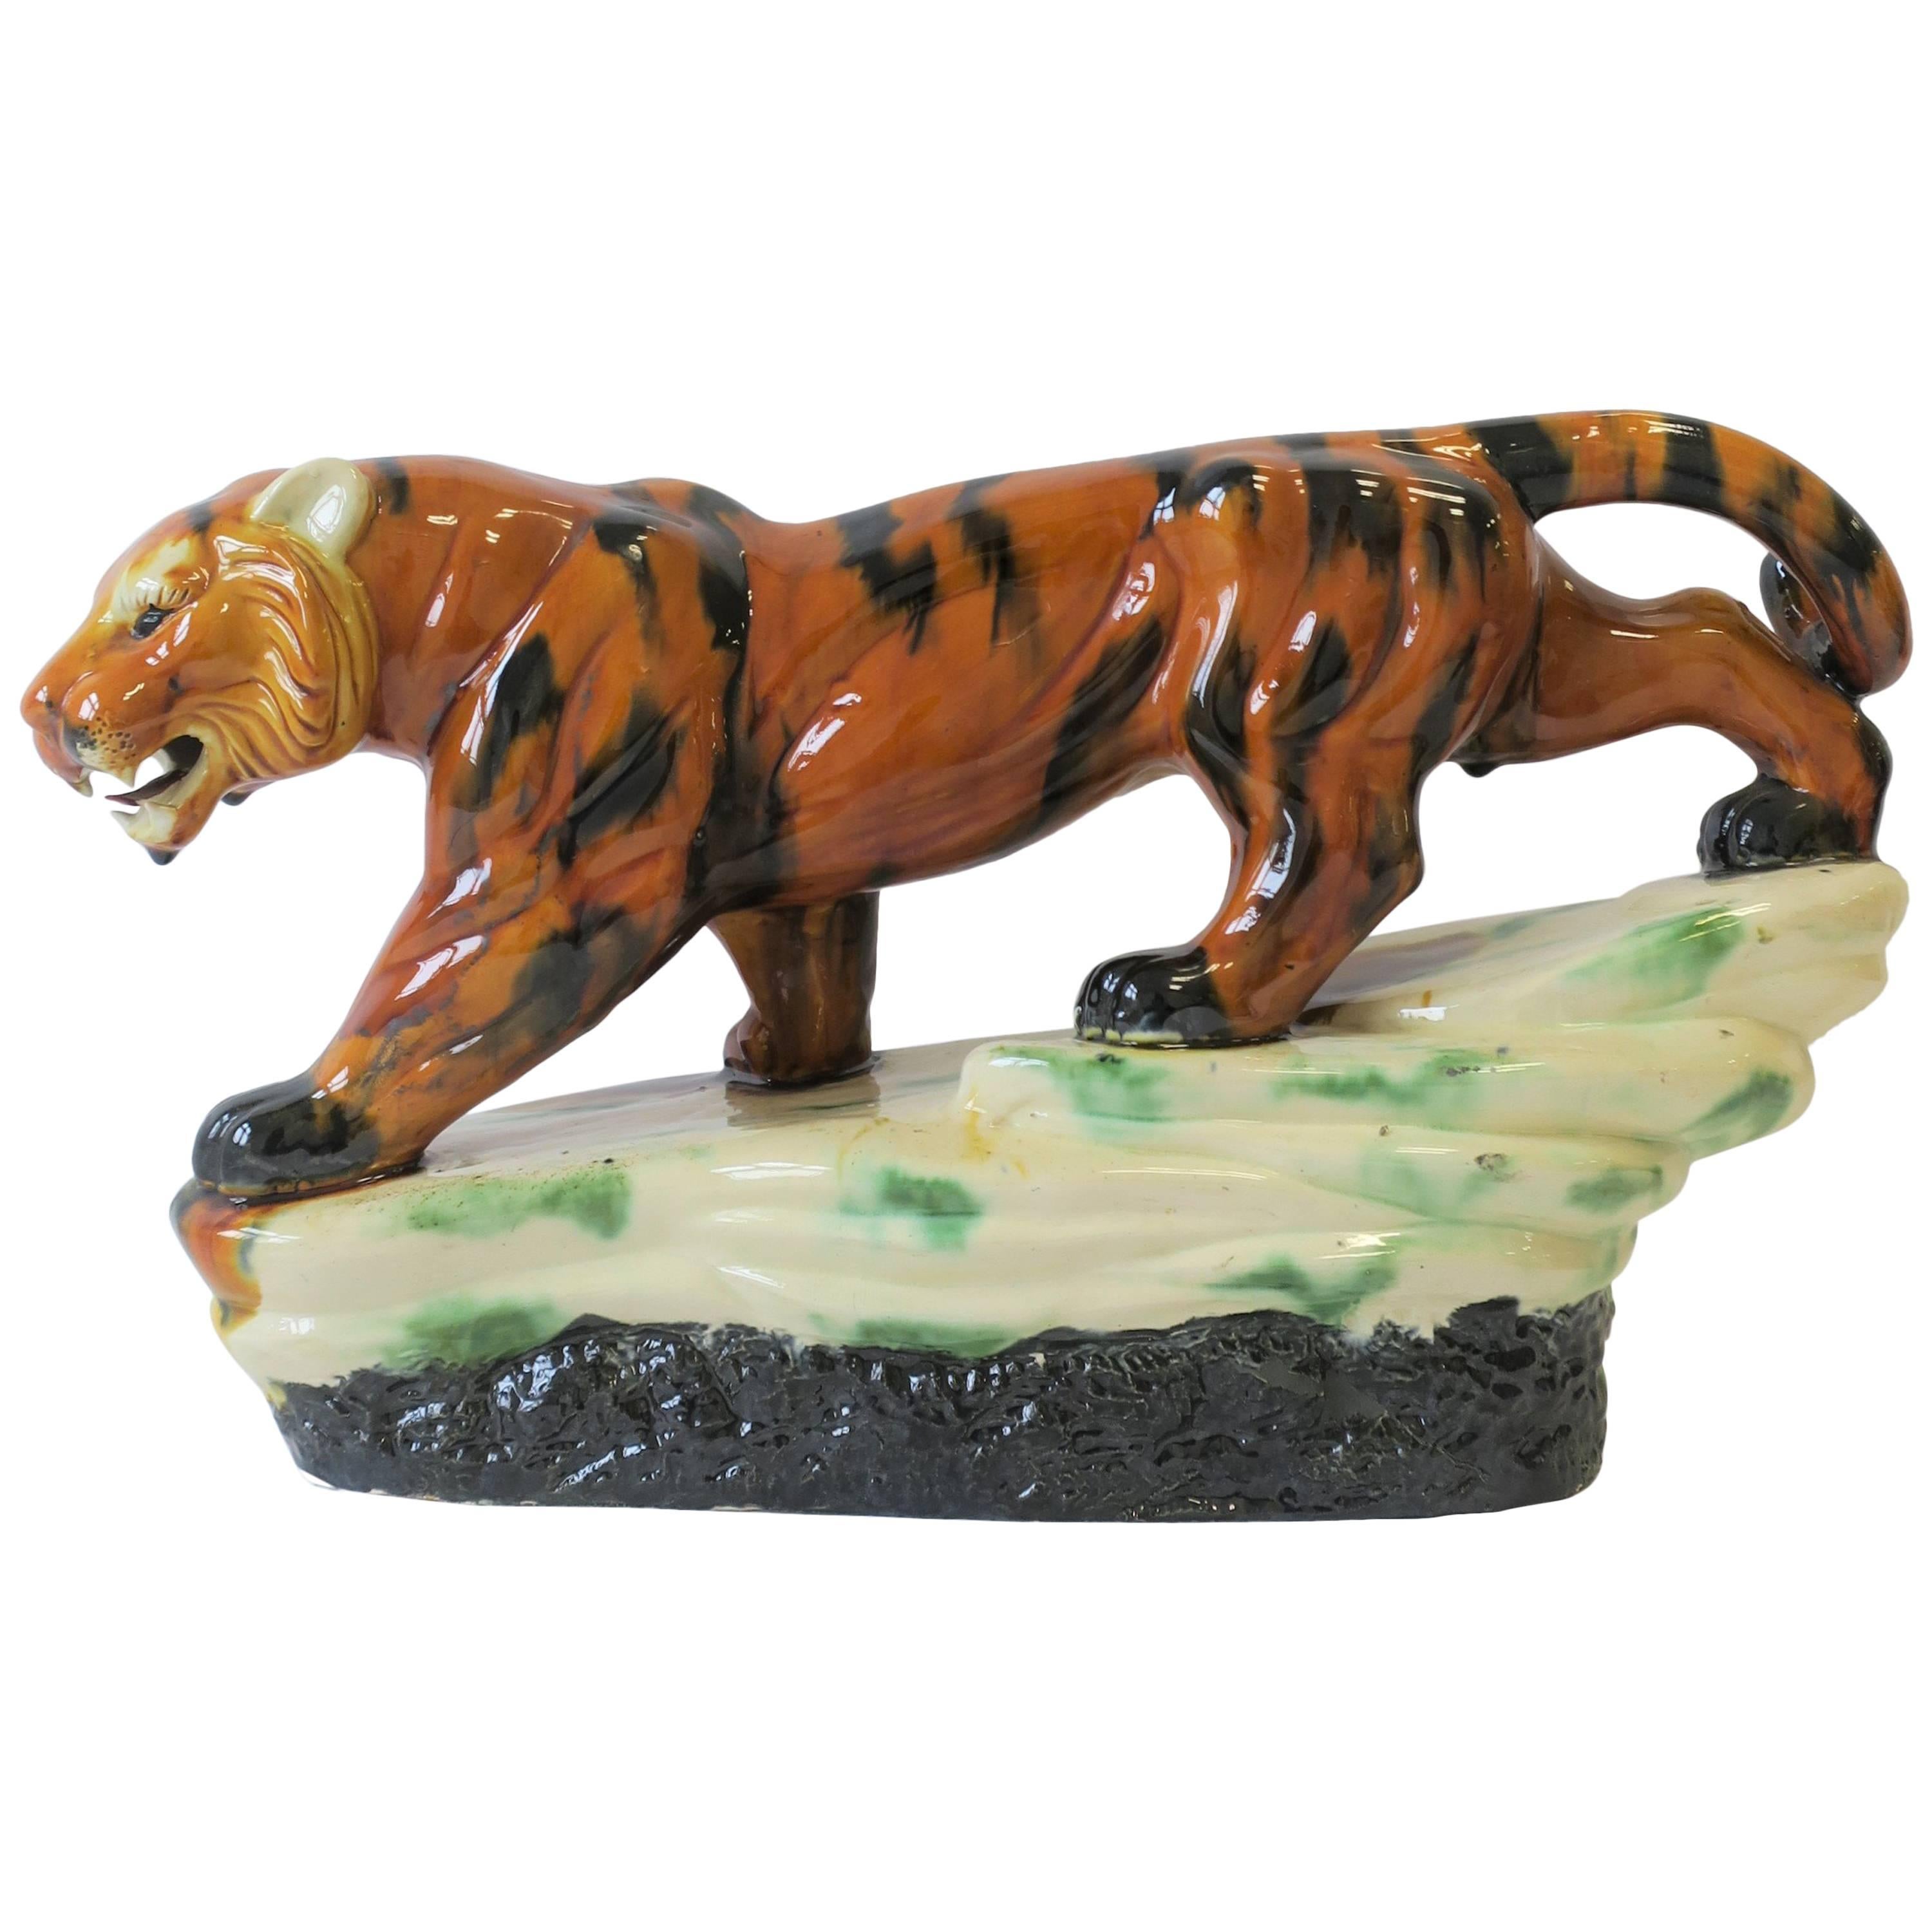 Tiger Cat Animal Sculpture in the Art Deco Style